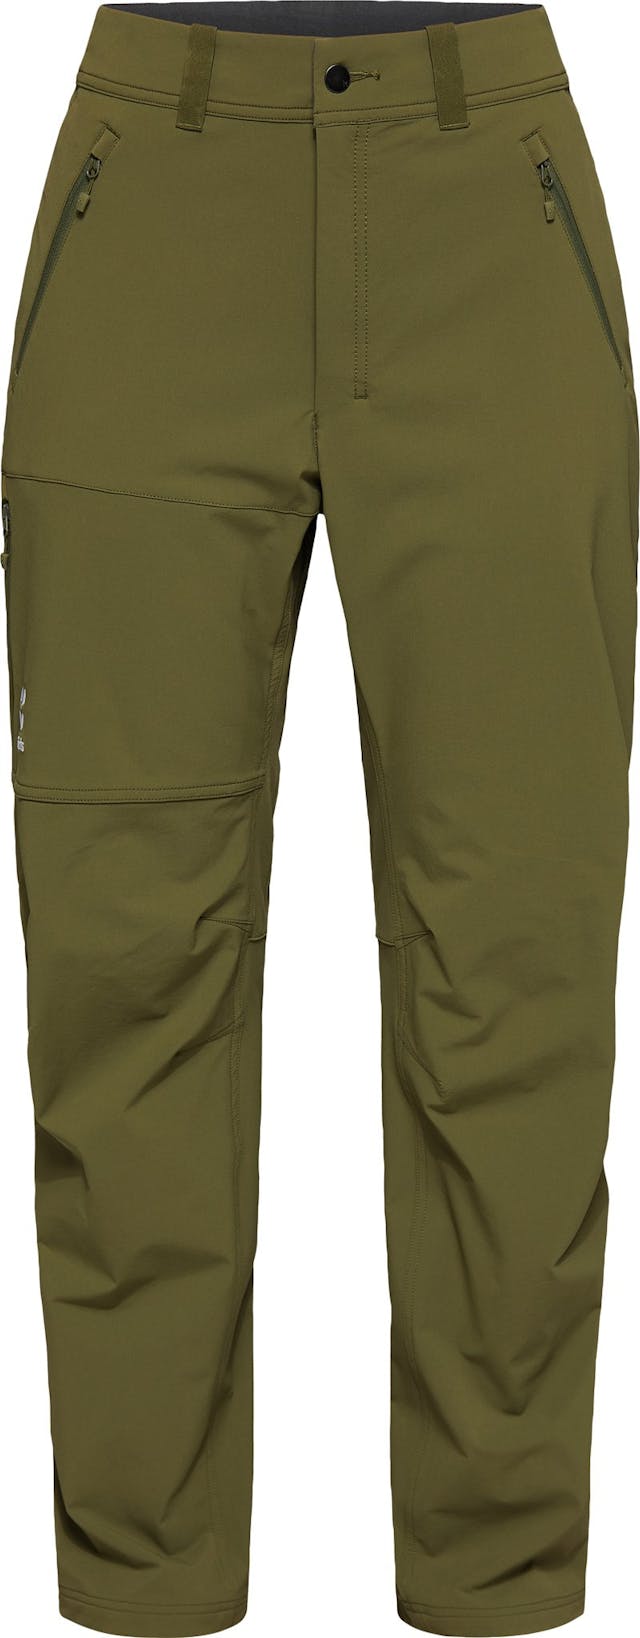 Product image for Morän Softshell Relaxed Pant - Women's